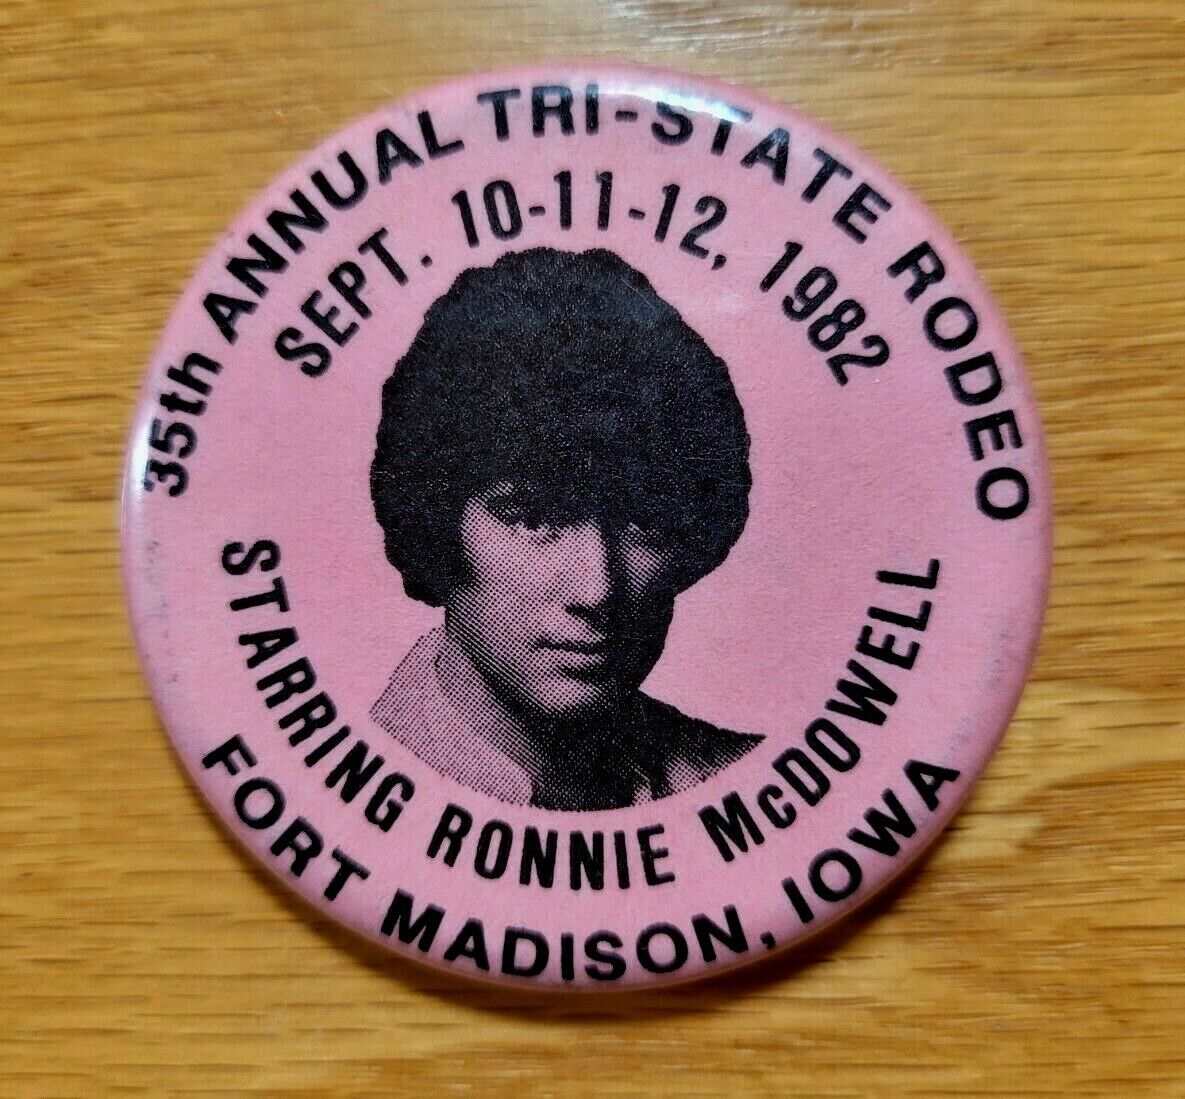 TRI-STATE RODEO 1982 Fort Madison, Iowa with Ronnie McDowell Pinback Pin Button